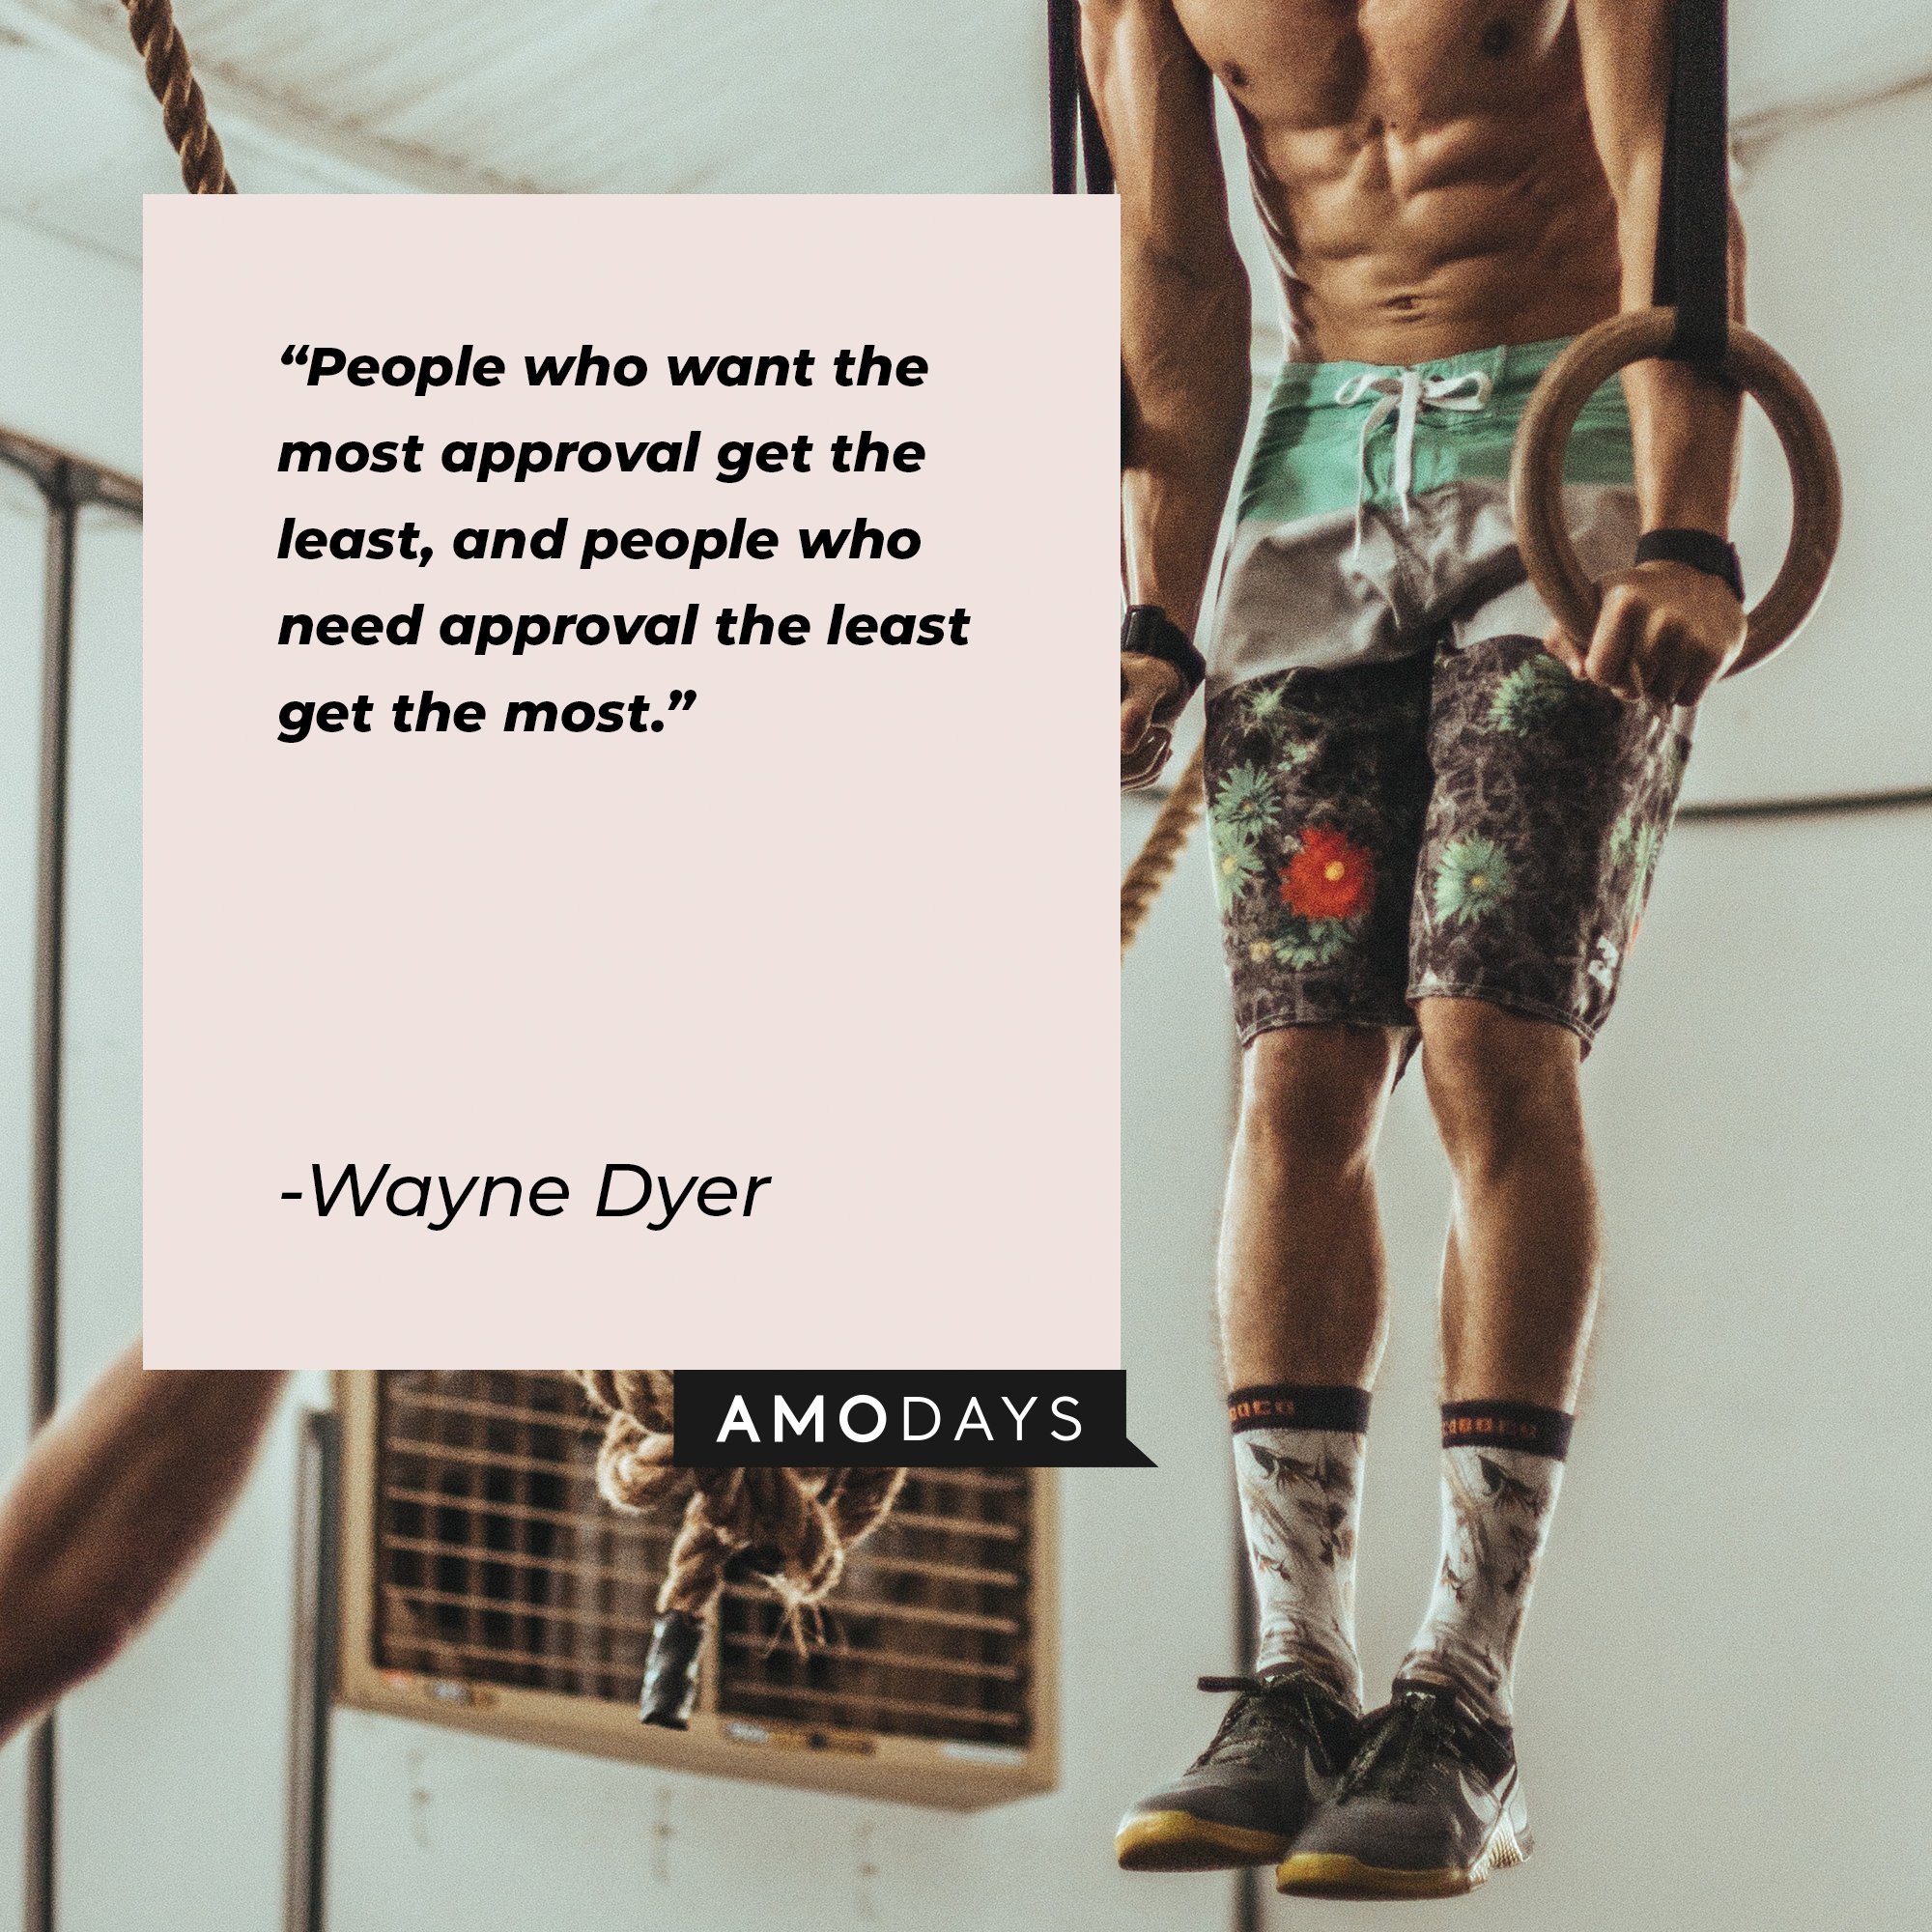 Wayne Dyer’s quote: "People who want the most approval get the least, and people who need approval the least get the most." | Image: AmoDays 